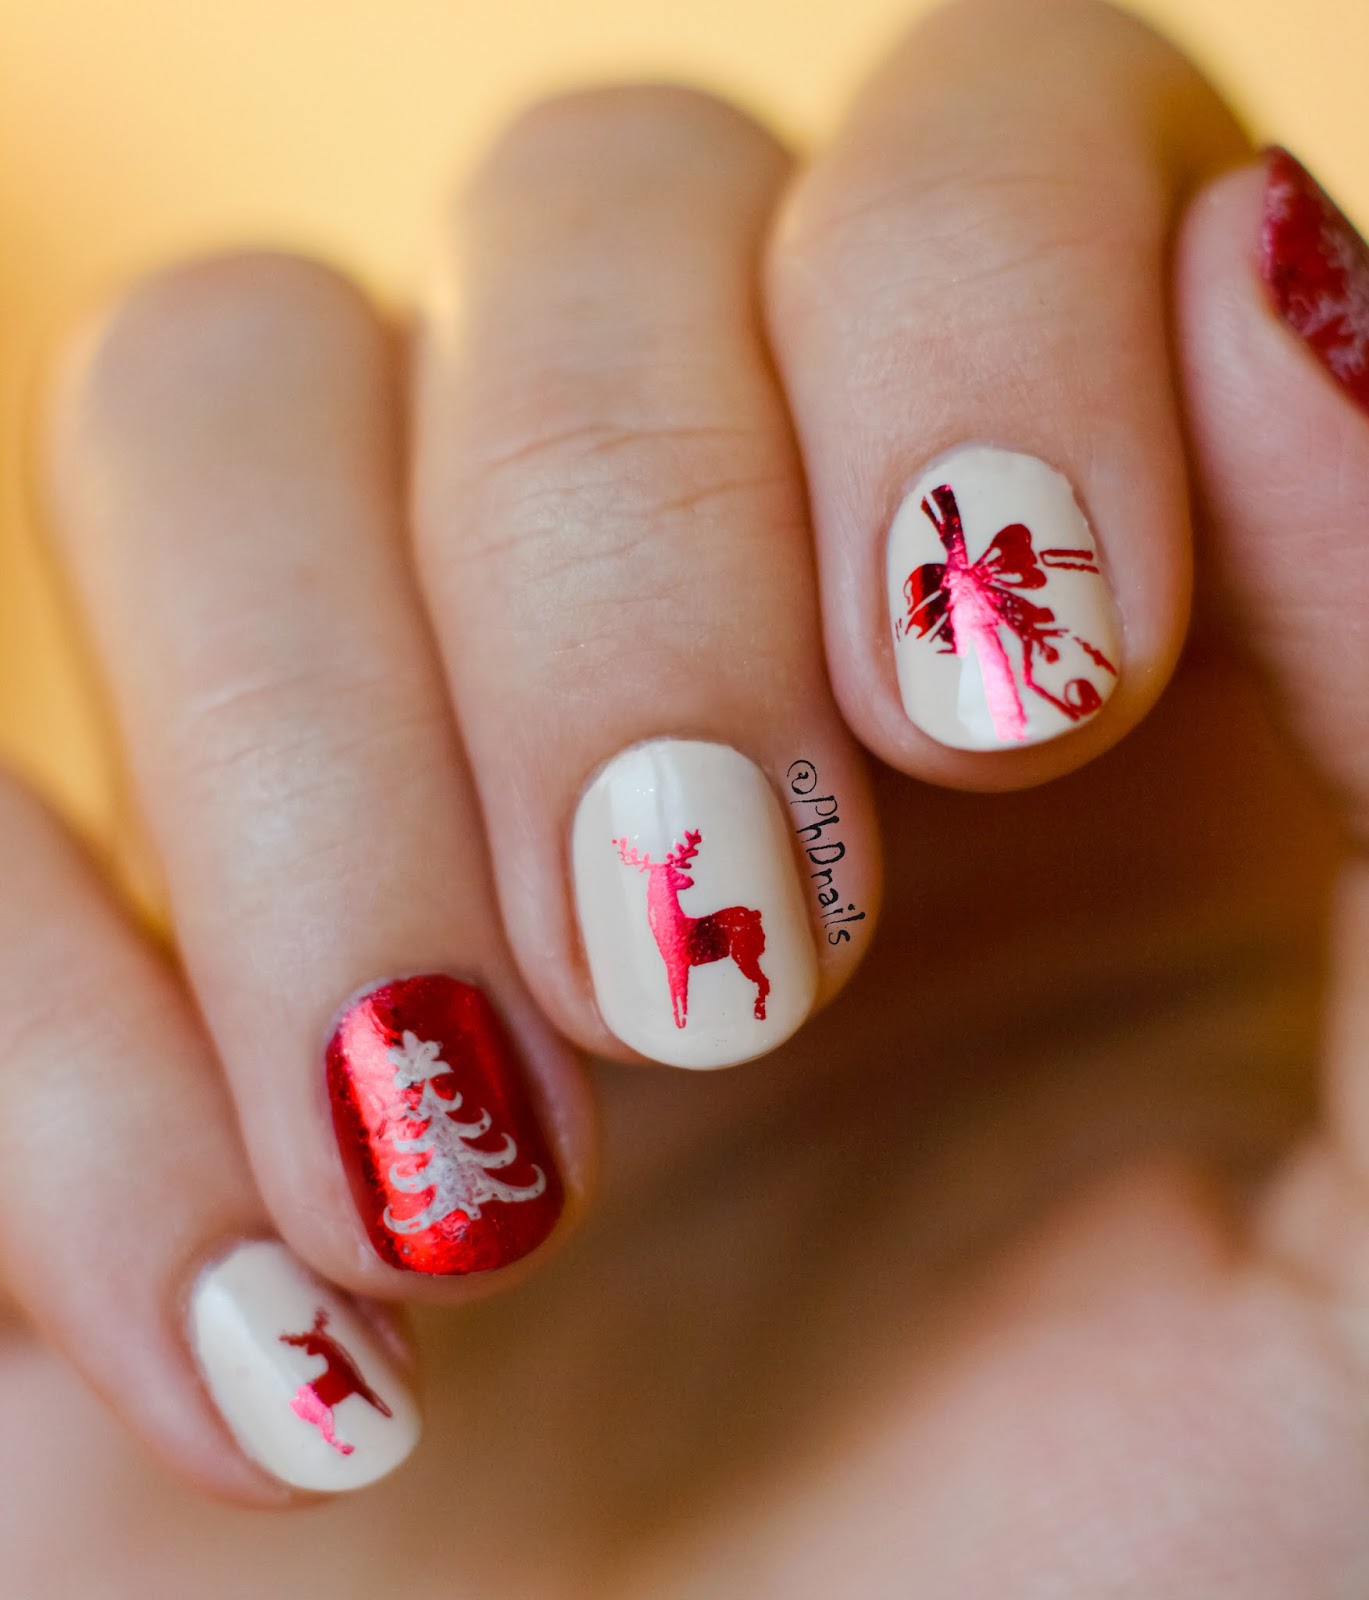 PhD nails: Reindeer wrapping paper inspired nail art with foil stamping